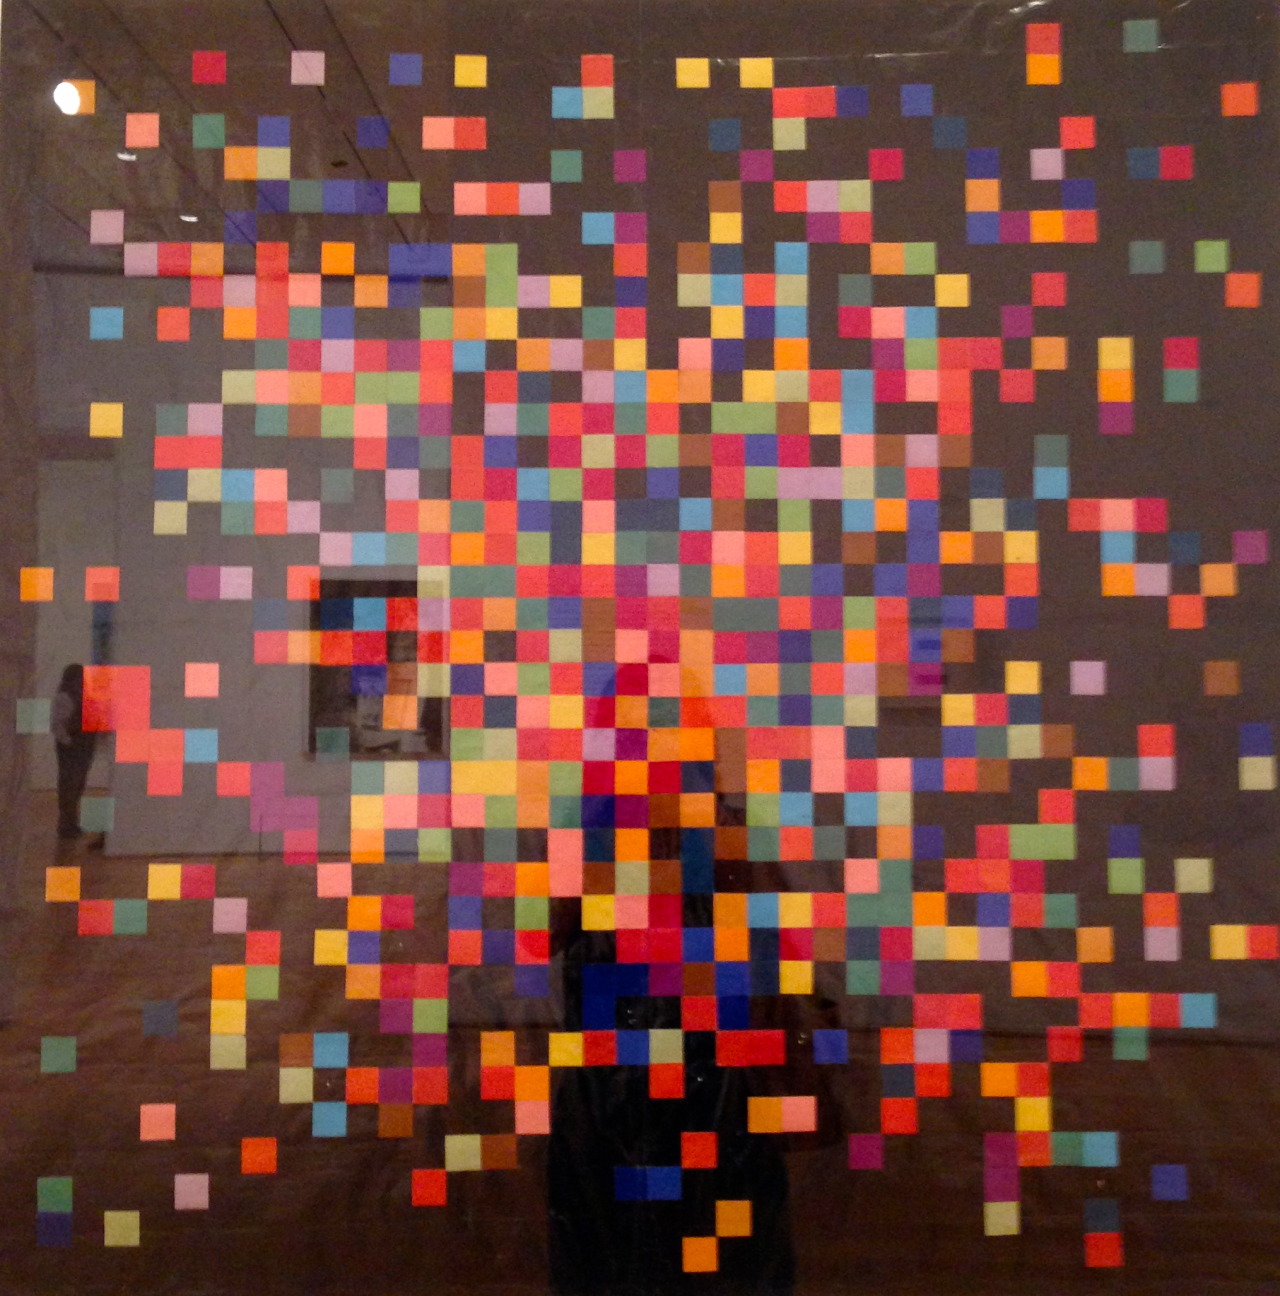 Ellsworth Kelly’s Spectrum Colors Arranged by Chance IV